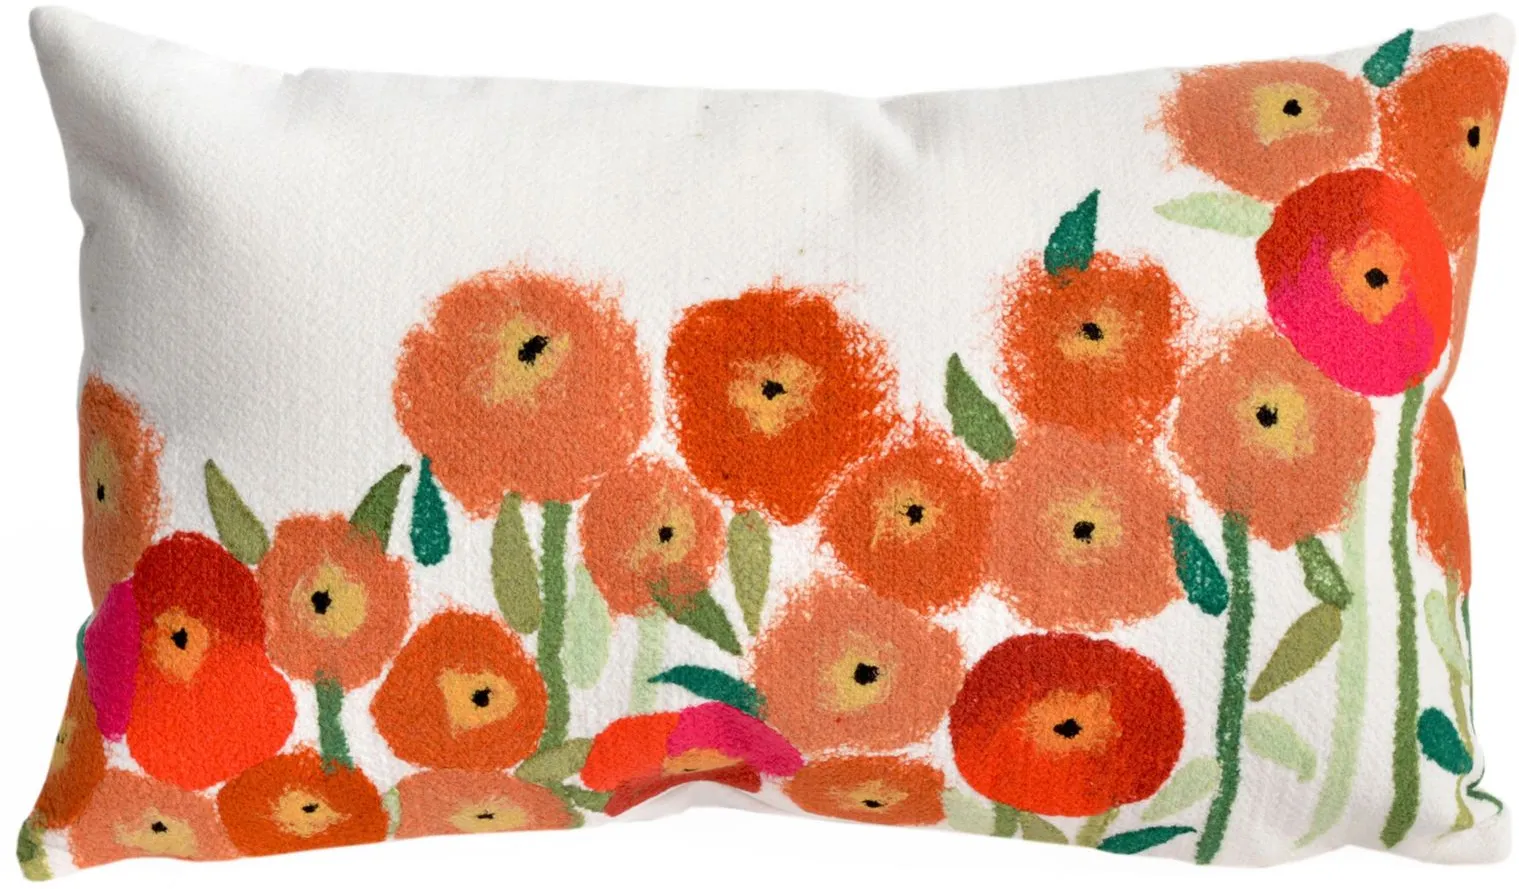 Liora Manne Visions III Poppies Pillow in Red by Trans-Ocean Import Co Inc